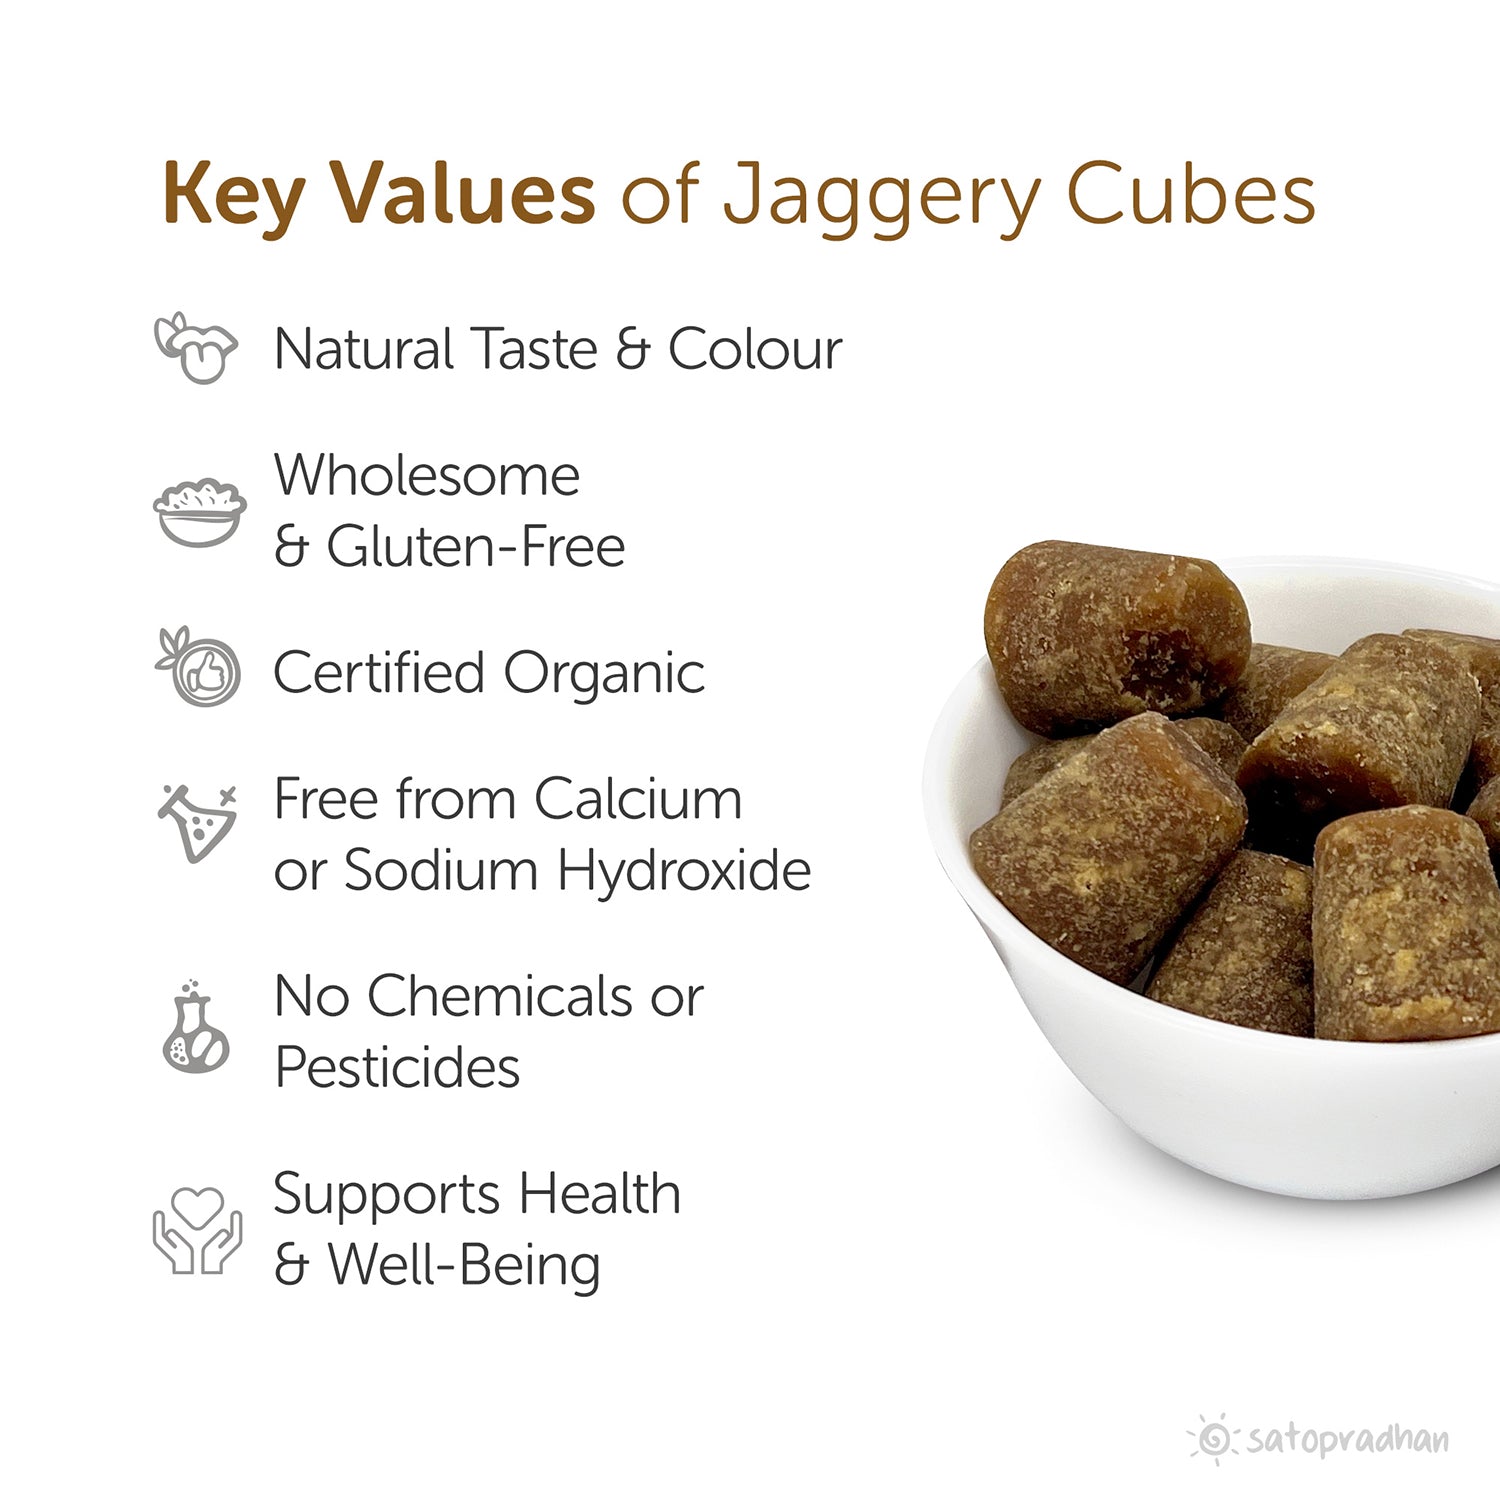 The jaggey cones are certified-organic, gives natural caramel like taste and supports health & well-being